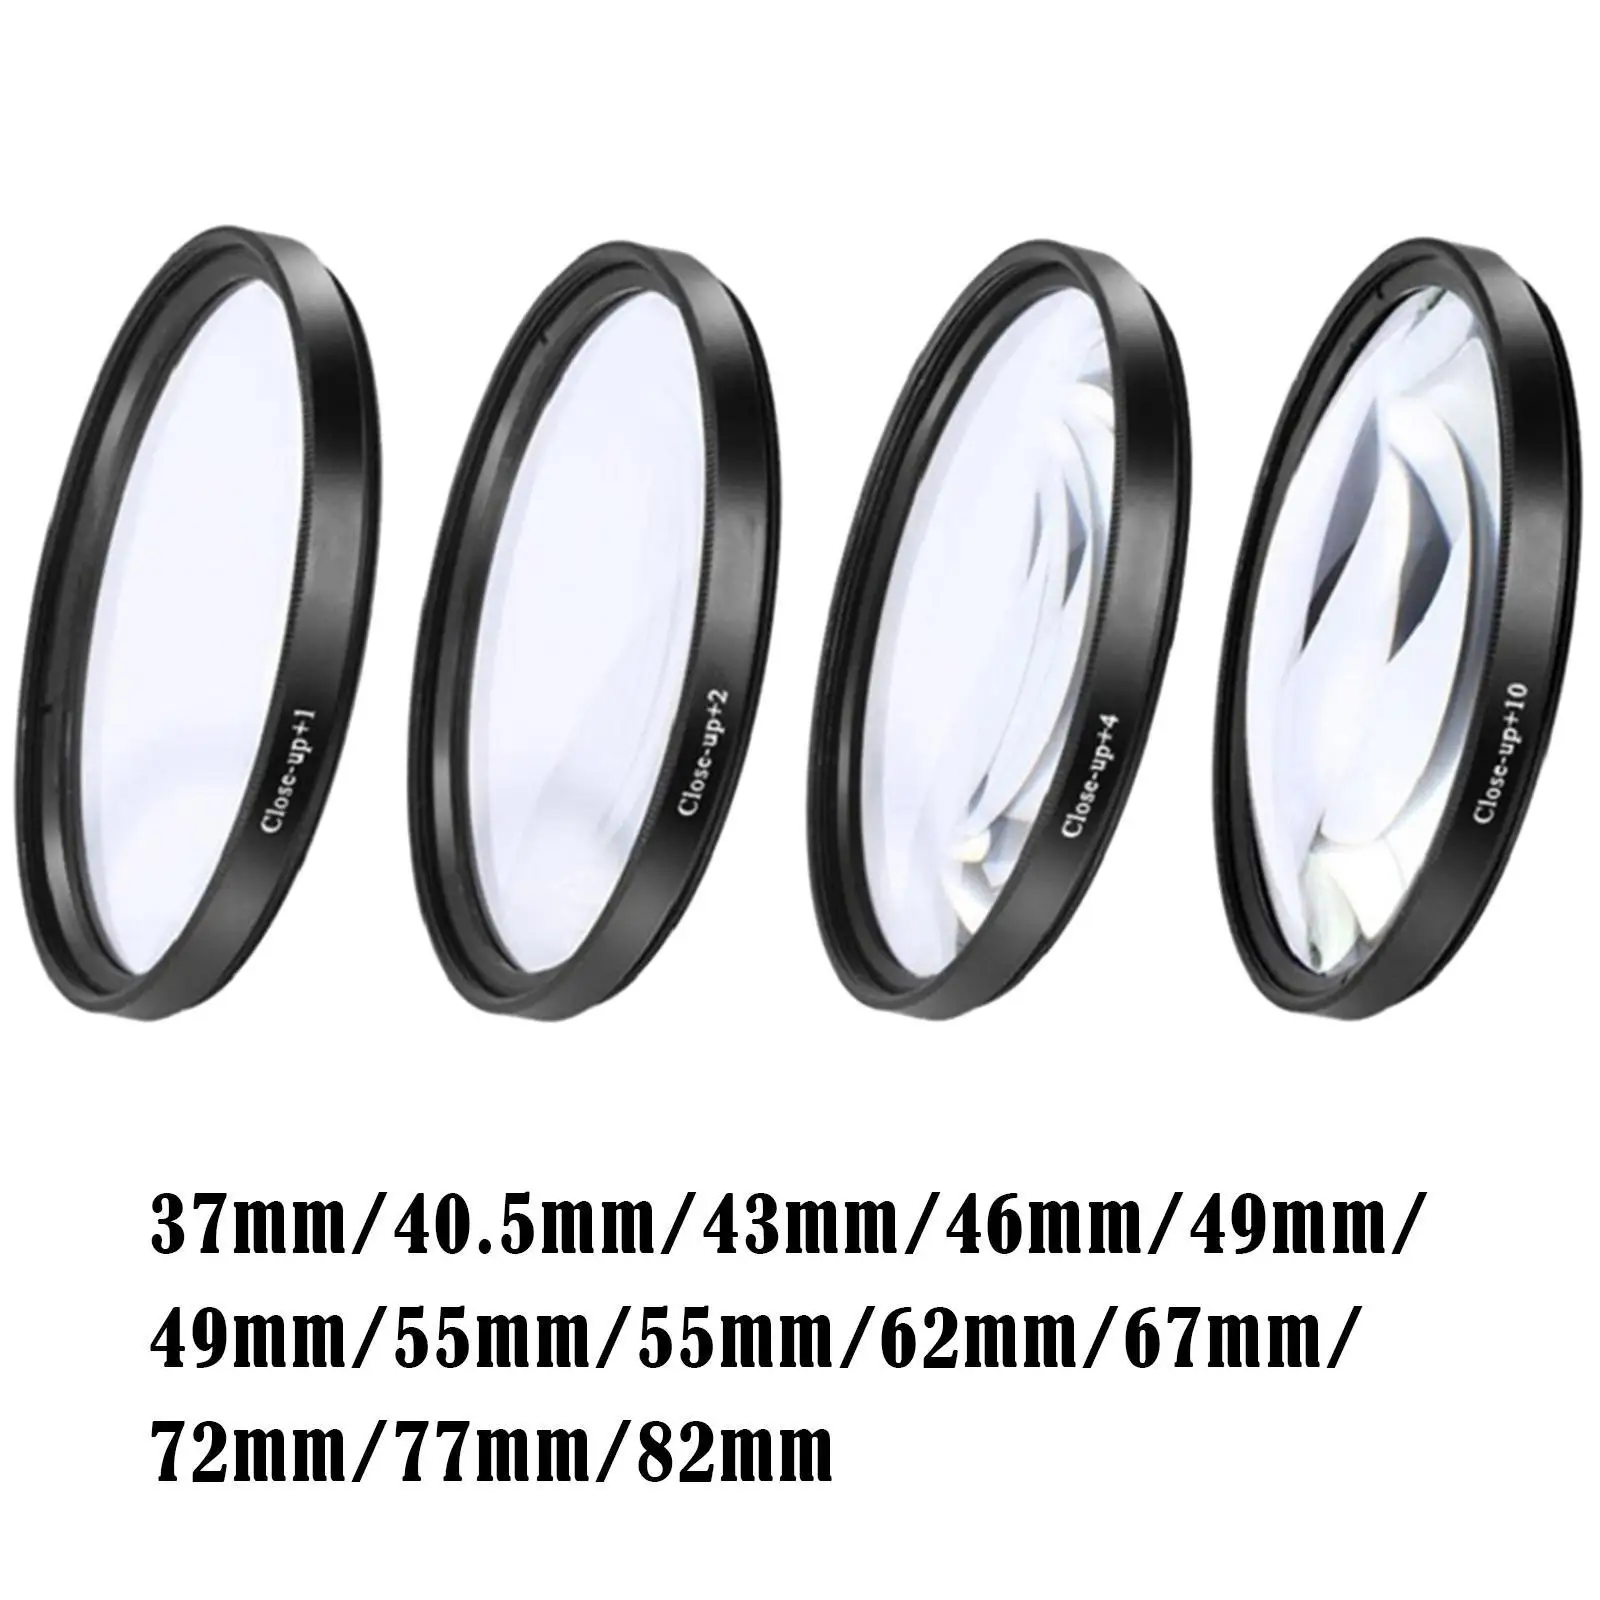  Filter Kit, +1 +2 +4 +10 Filter Accessory, Optical Glass Conversion Lens, with Filter Bag